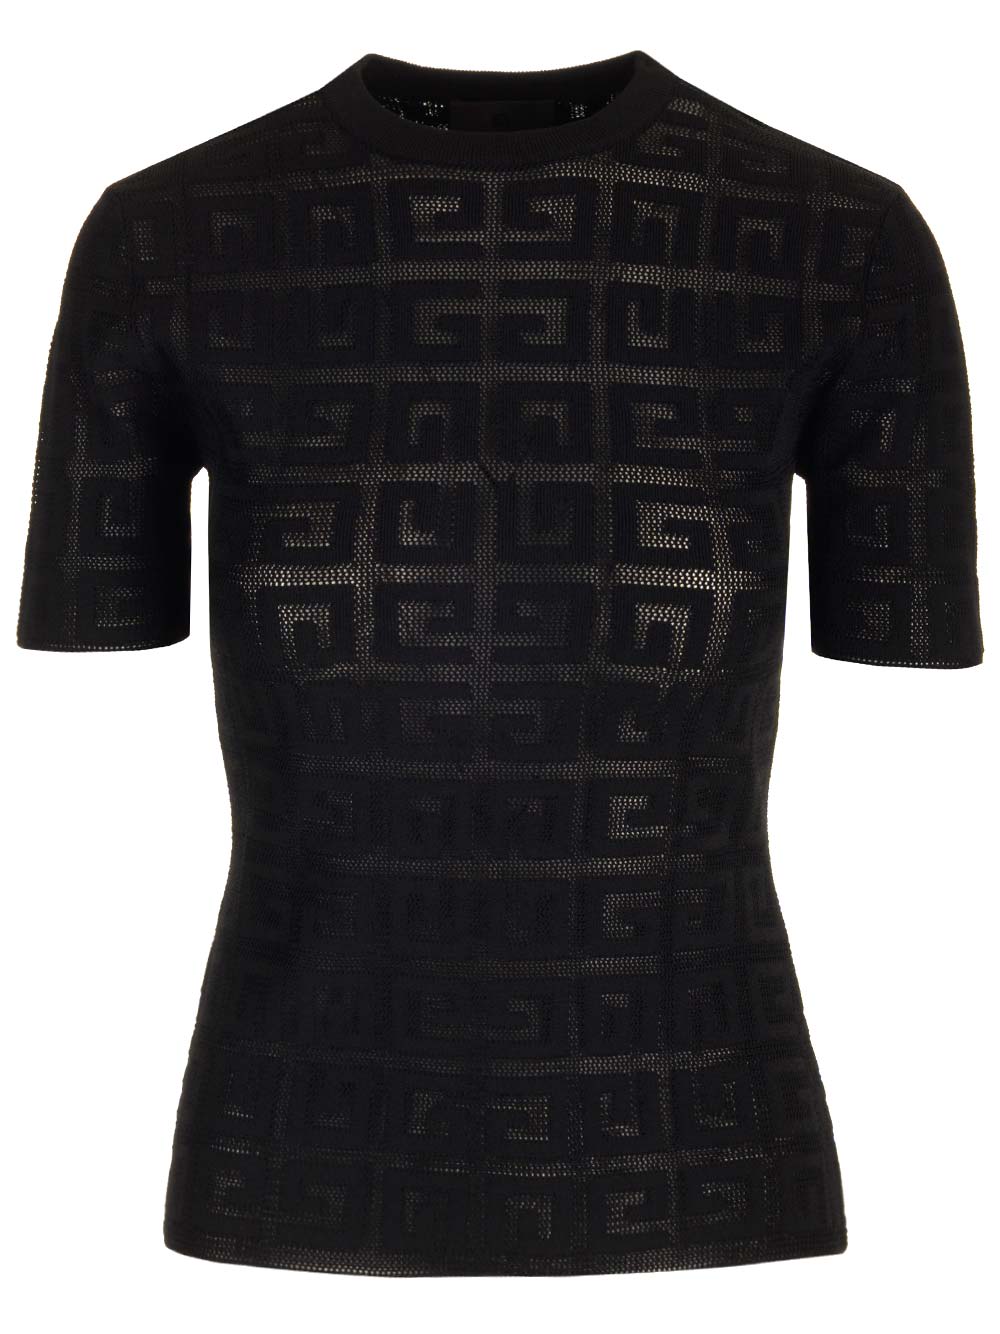 GIVENCHY TEXTURED LACE TOP